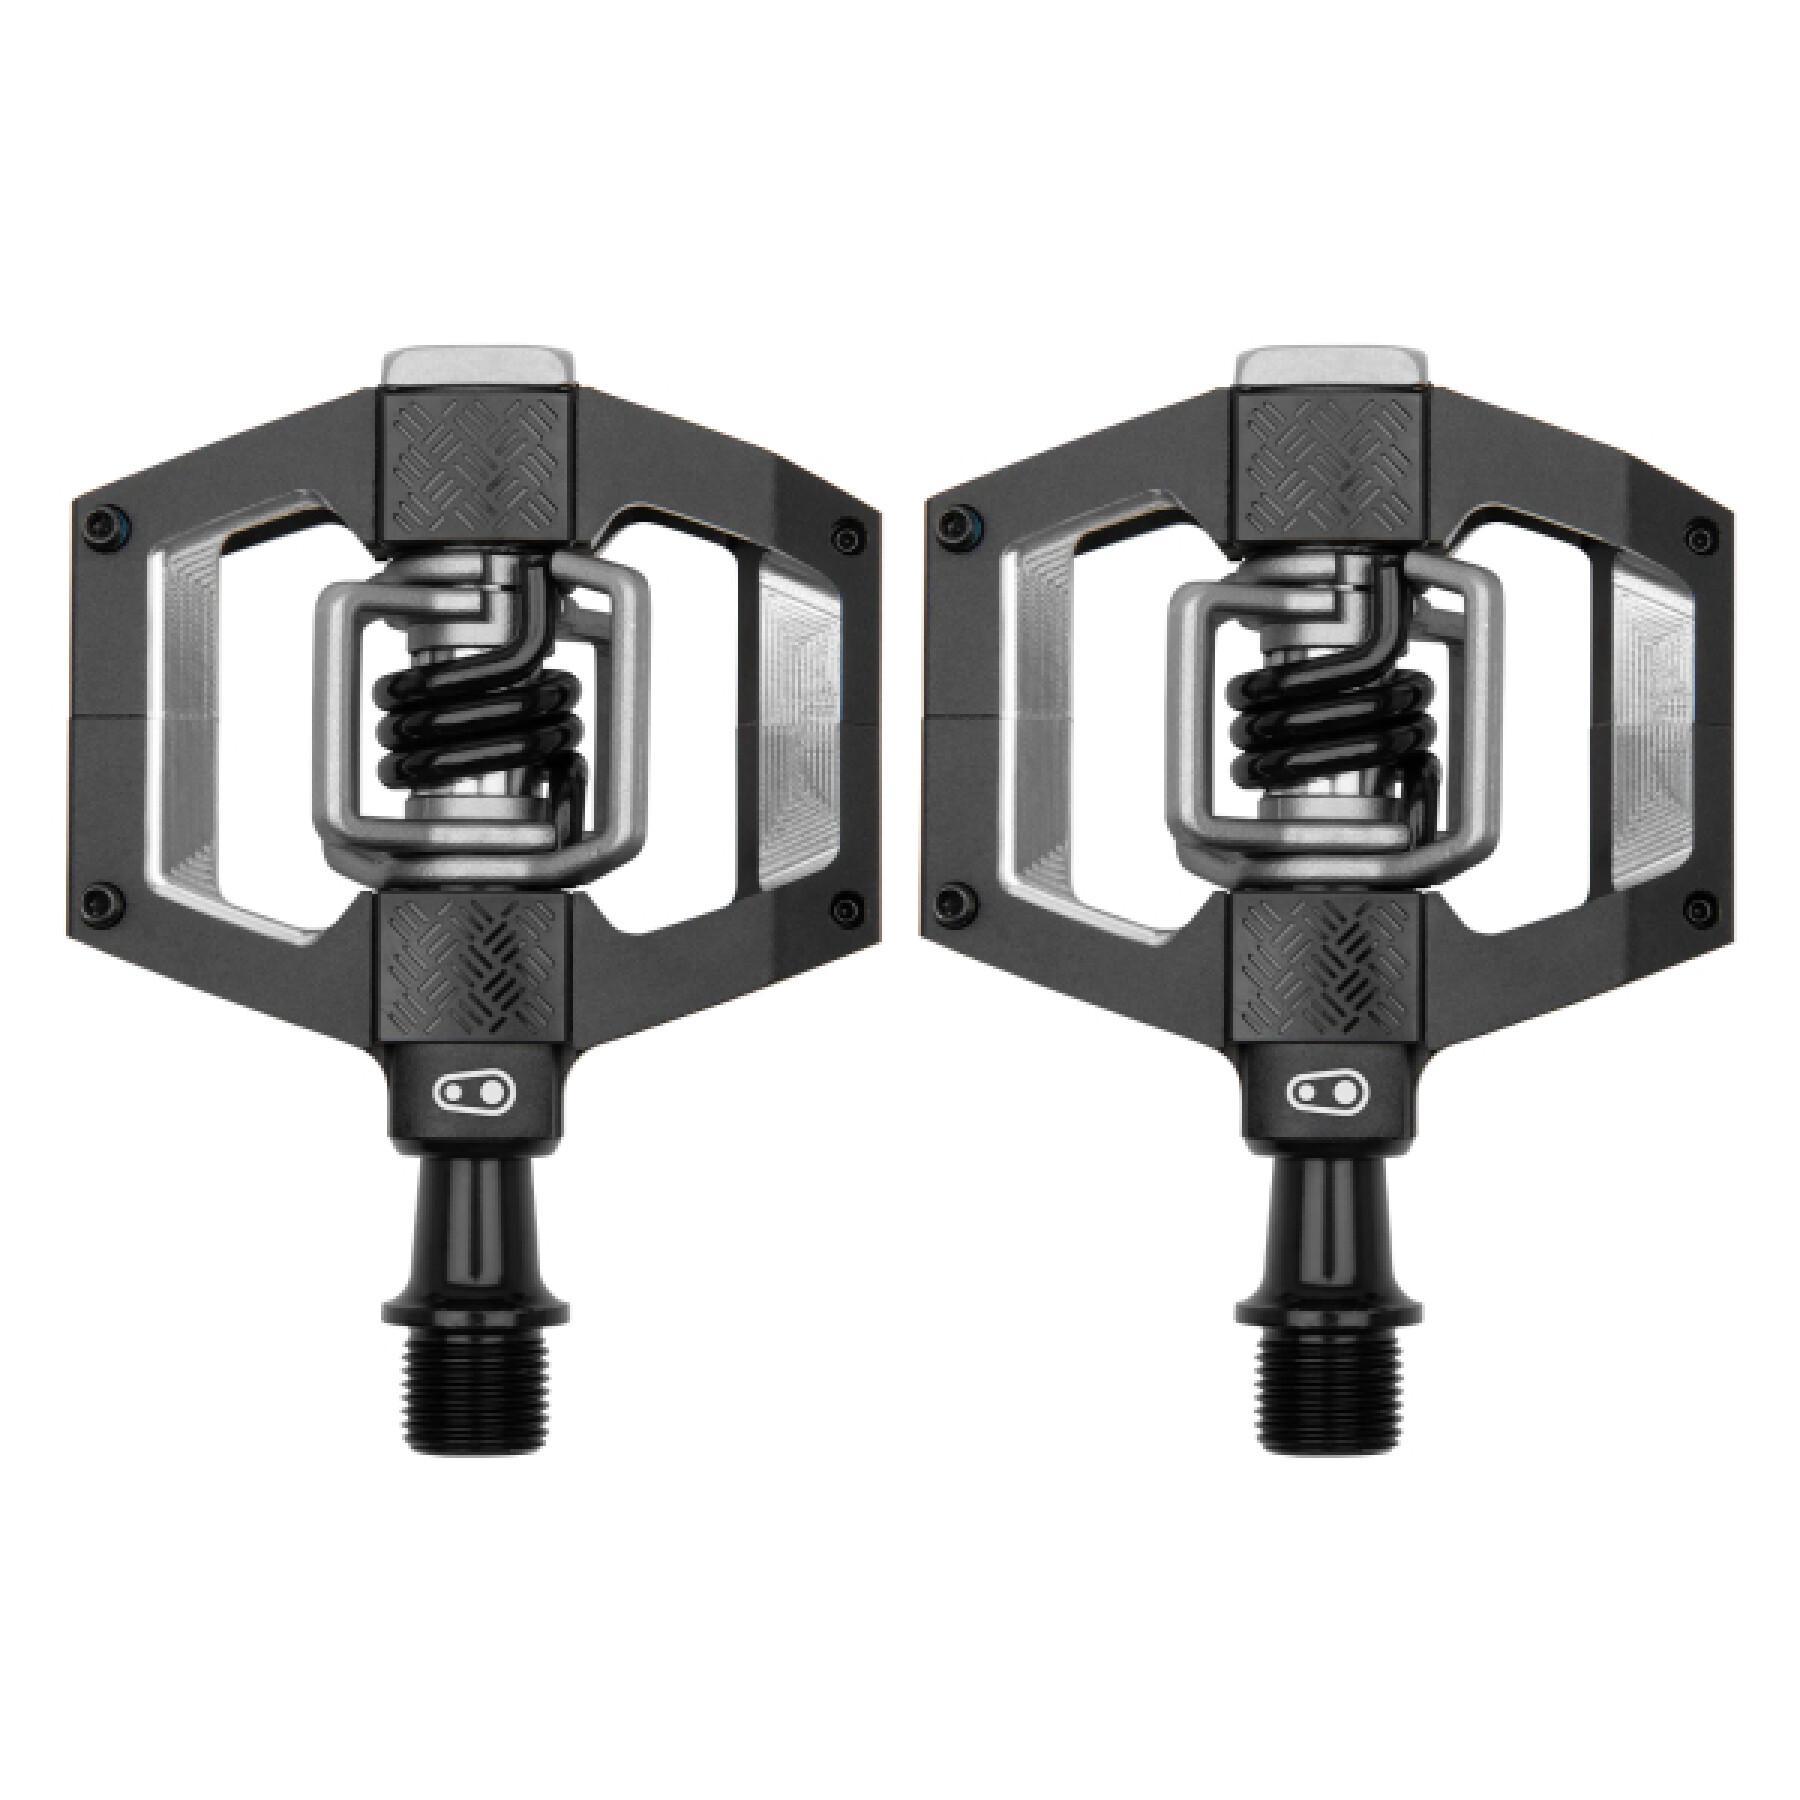 Pedals crankbrothers Mallet Trail